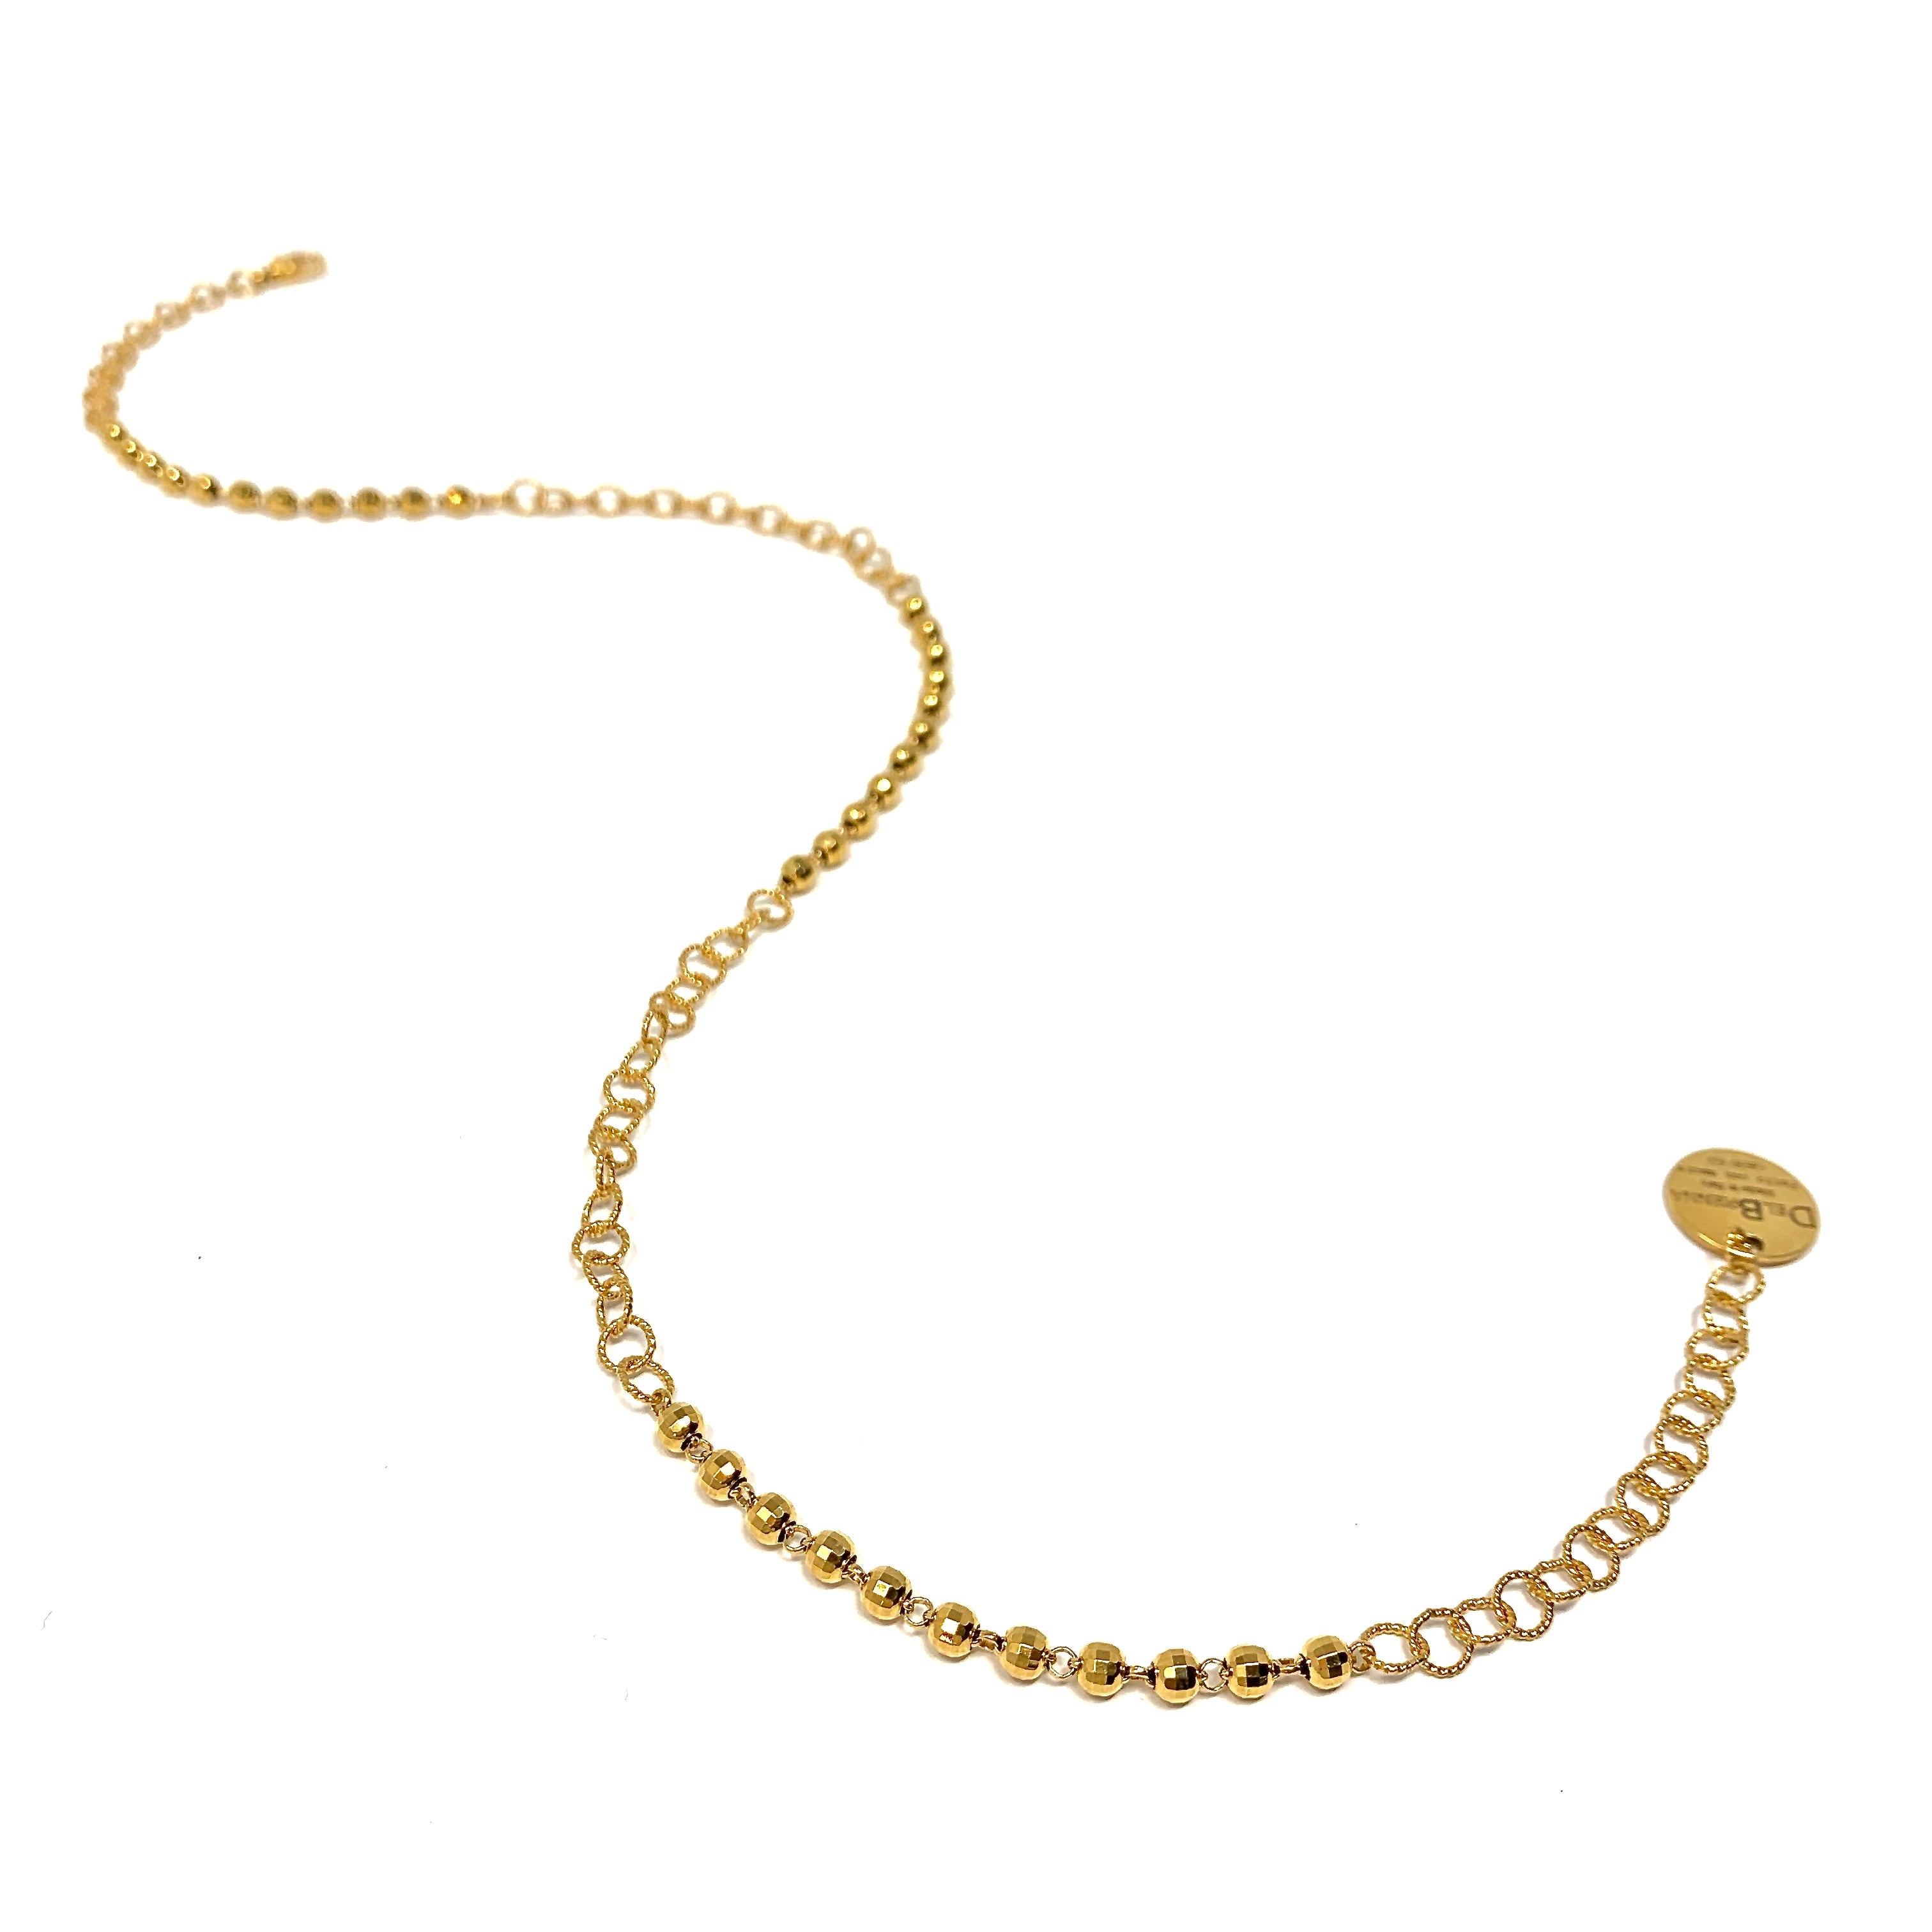 Wispy 5mm Necklace in Gold with Diamond Beads